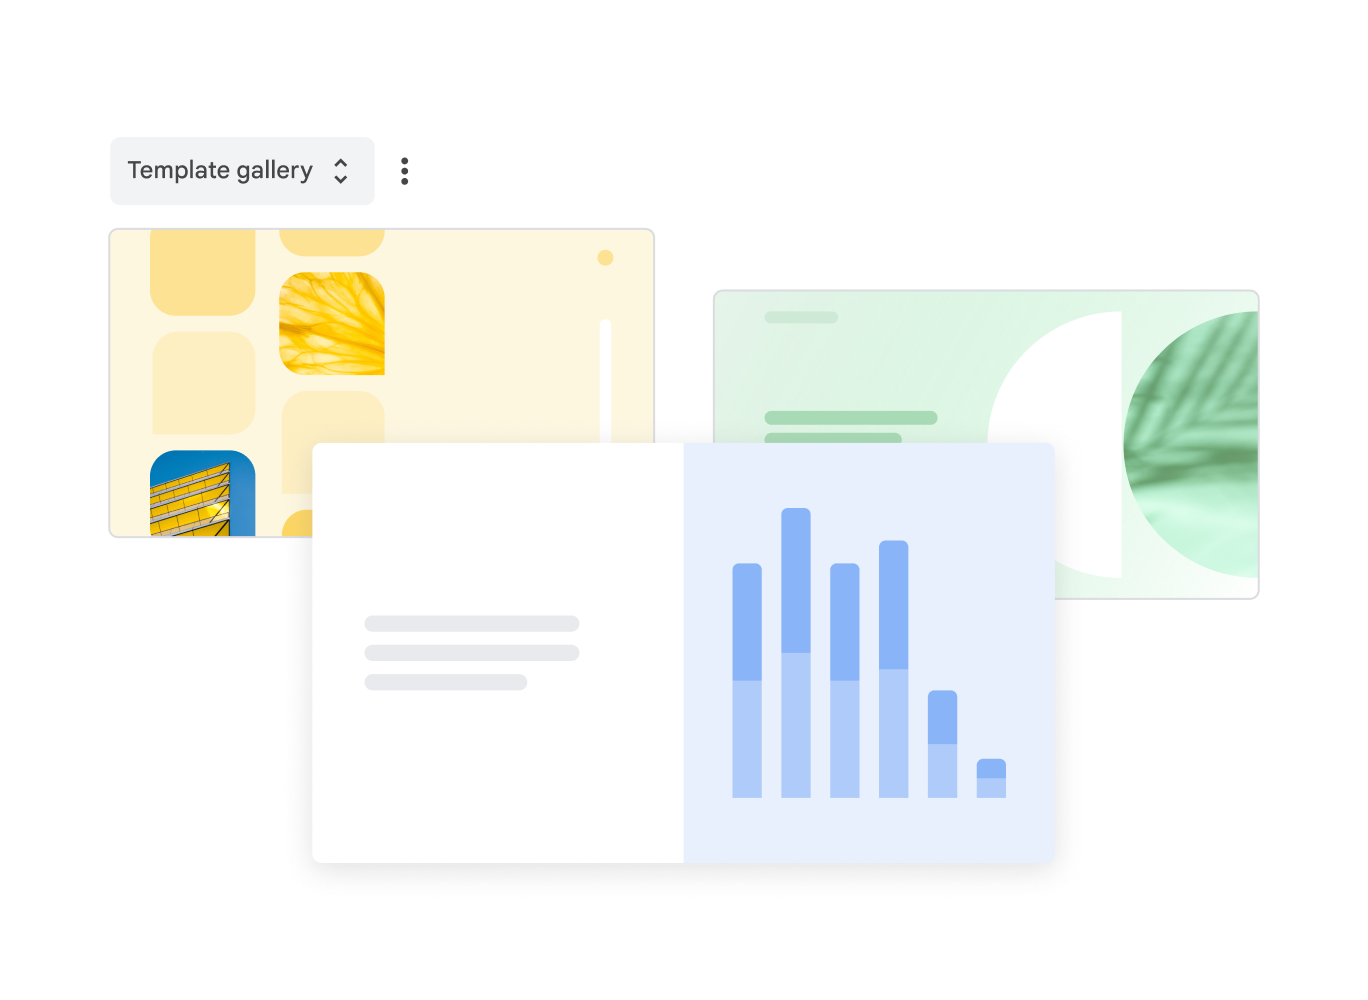 Three pre-designed Google Slides templates to choose from in the templates gallery.